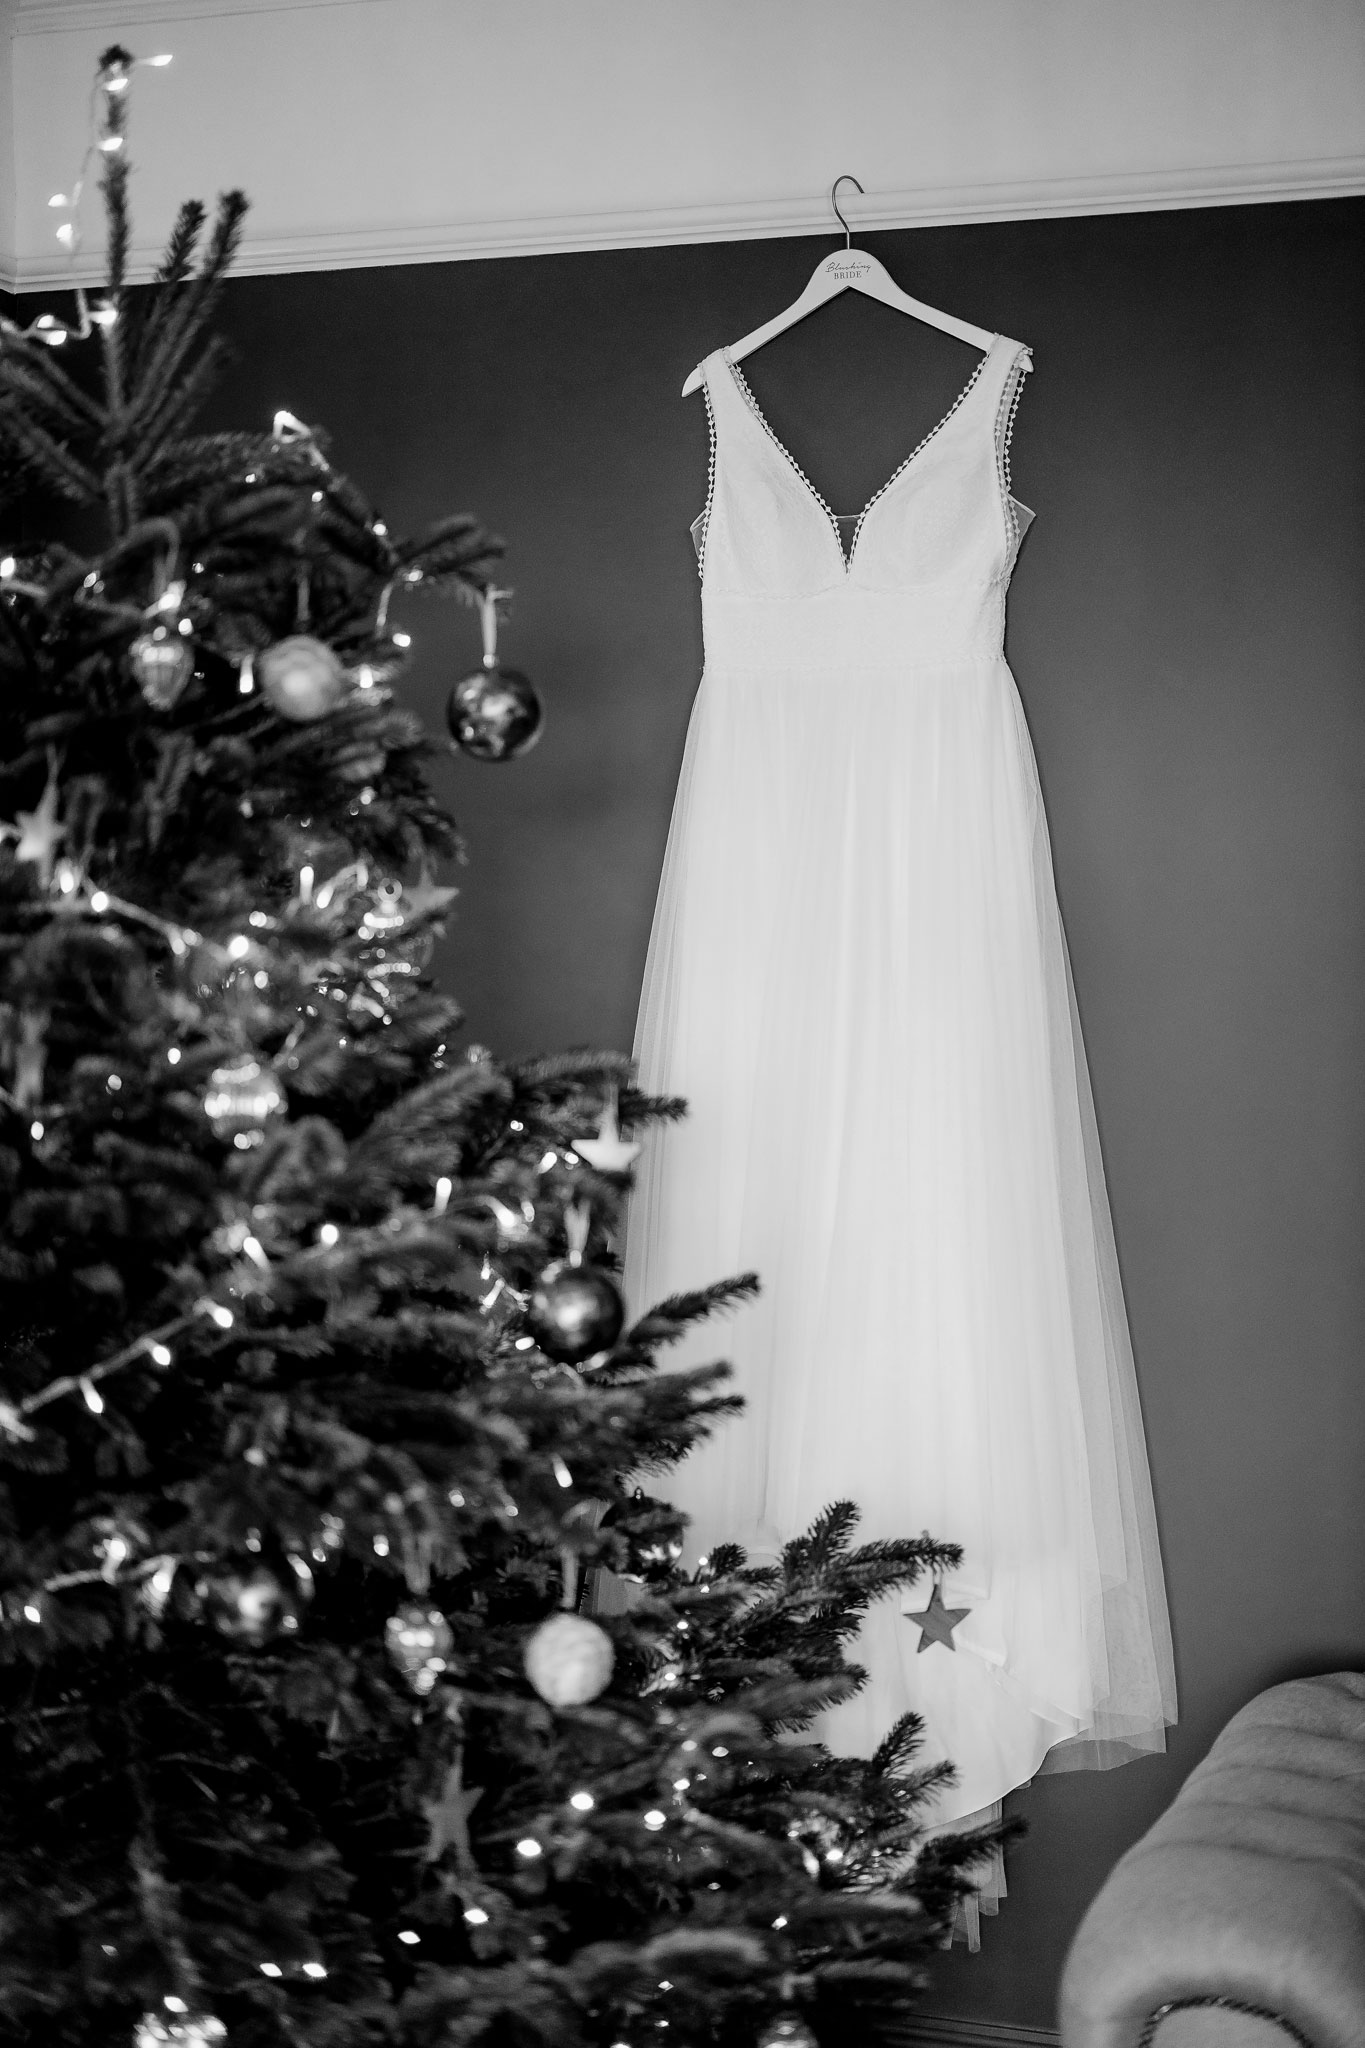 the brides dress hung up by the Christmas tree